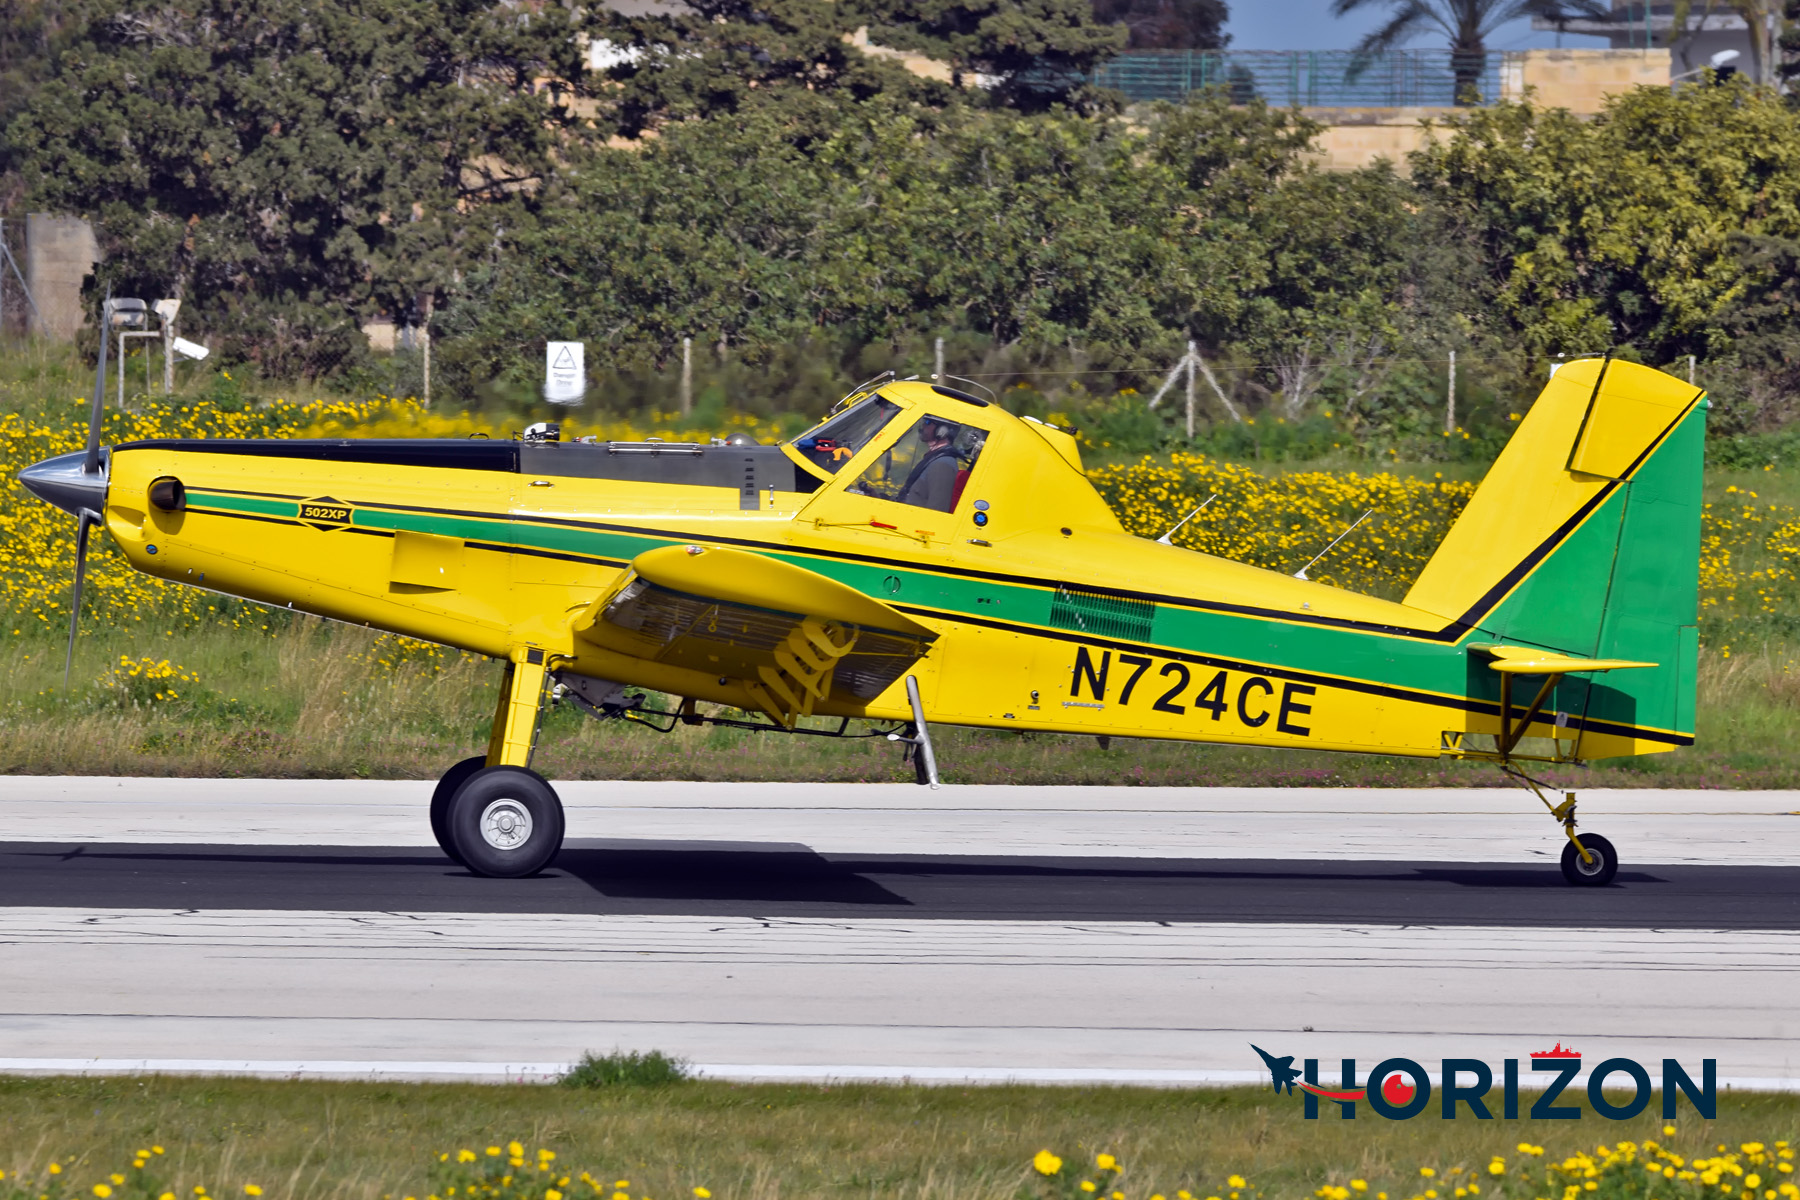 Air Tractor AT-503 N724CE. Photo By: Aiden Lee Briffa